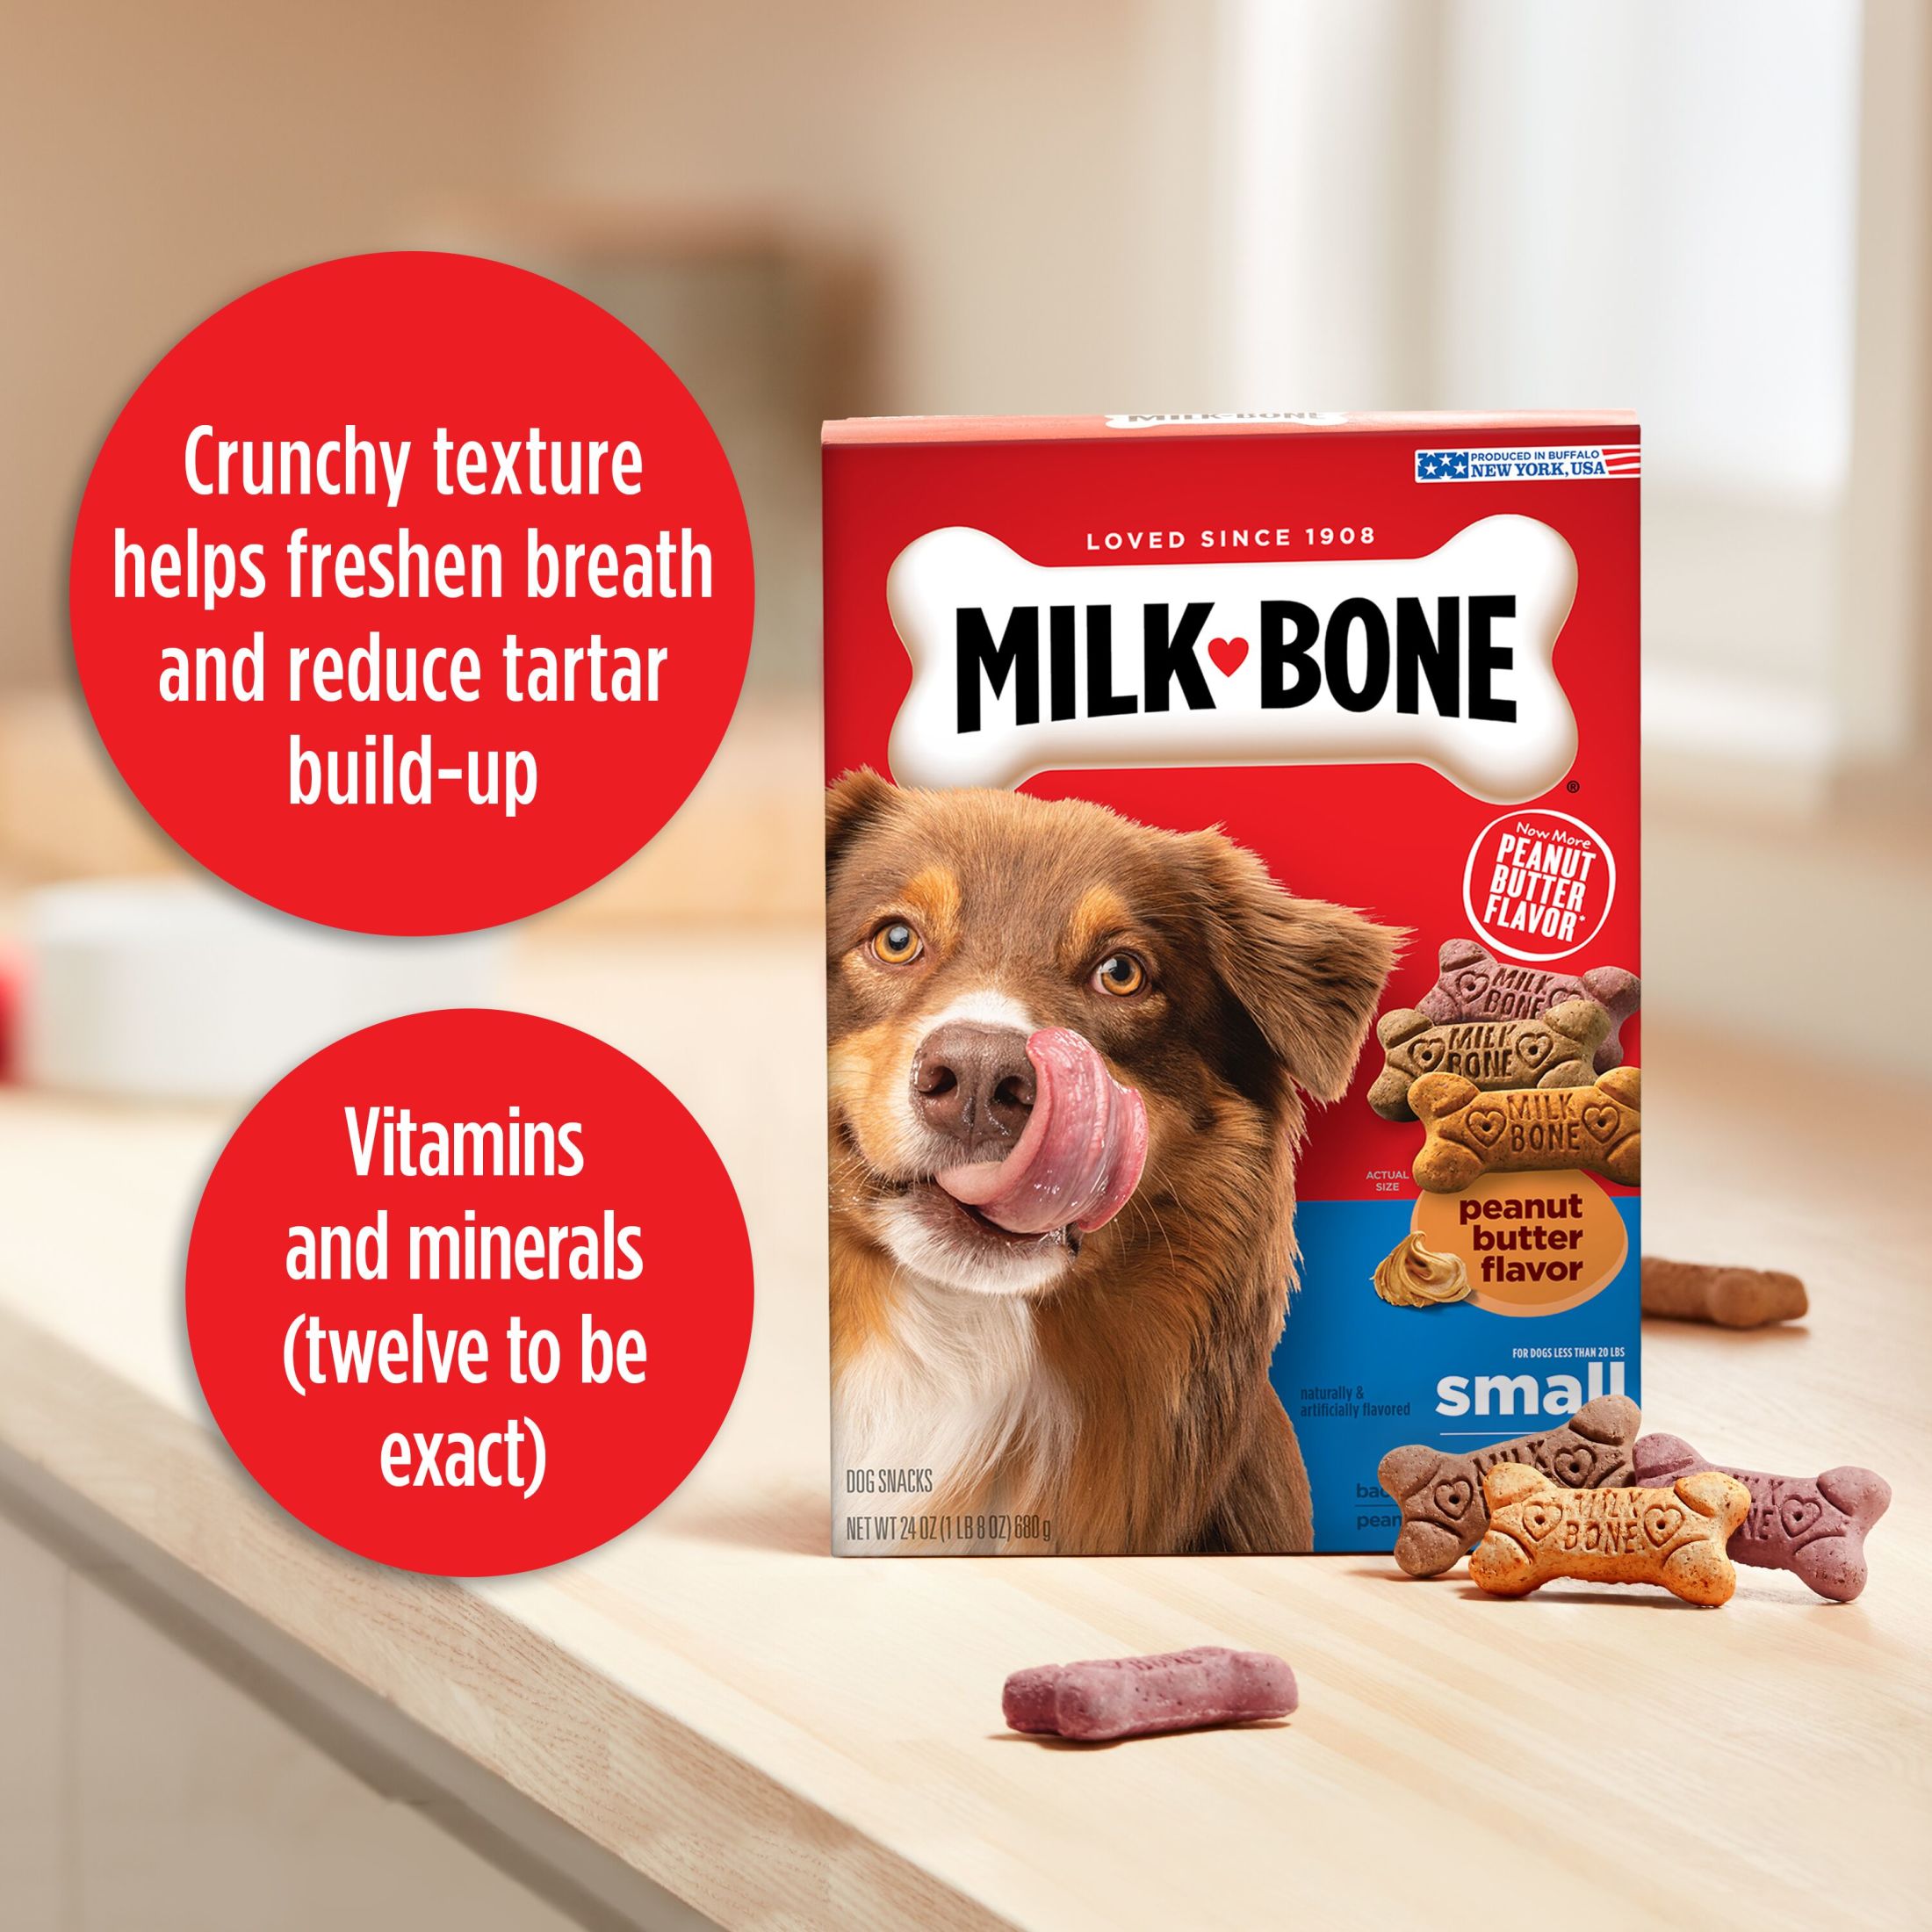 Milk-Bone Peanut Butter Flavor Naturally & Artificially Flavored Dog Biscuits, Crunchy Dog Treats, 7 Pounds - image 5 of 10